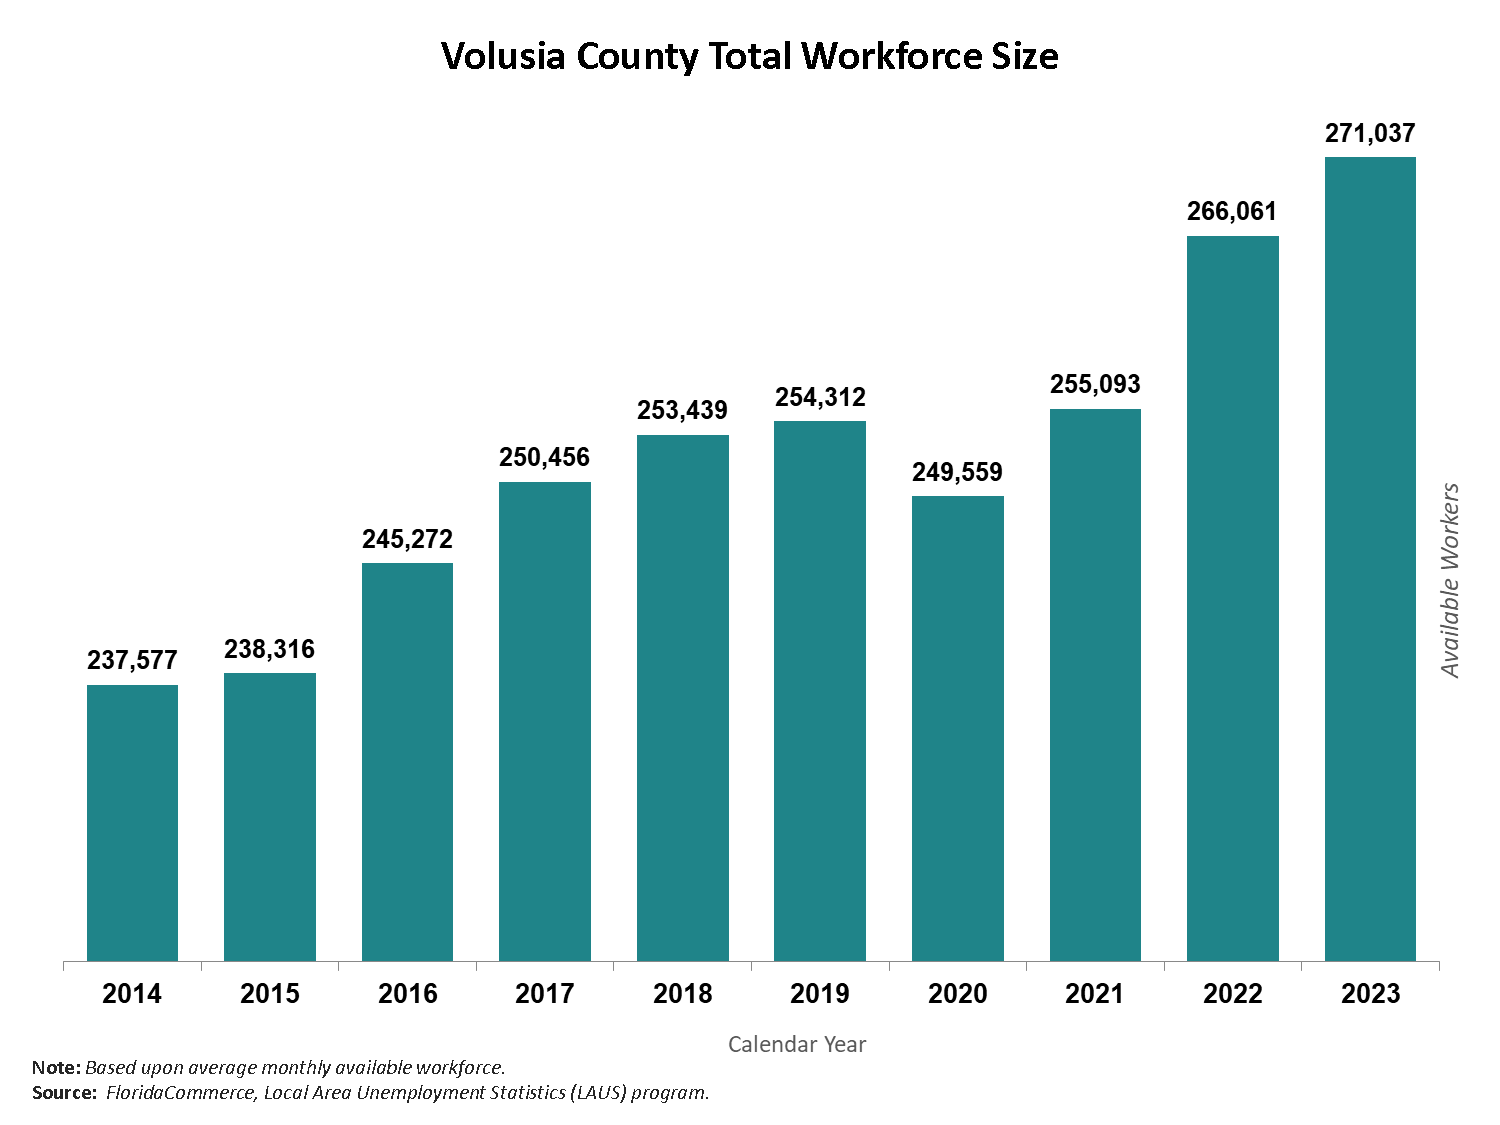 From 2014 to 2015 the size of Volusia County's workforce remained virtually unchanged, moving up and down from 237,577 to 238,316. Since 2015, the County's annual average workforce size had a steady increase to 254,312 in 2019. Workforce dropped by 2% to 249,559 in 2020 due to the COVID-19 pandemic. The workforce size has surpassed pre-pandemic levels by 6.6% from 254,312 in 2019 to an average of 271,037 in 2022.